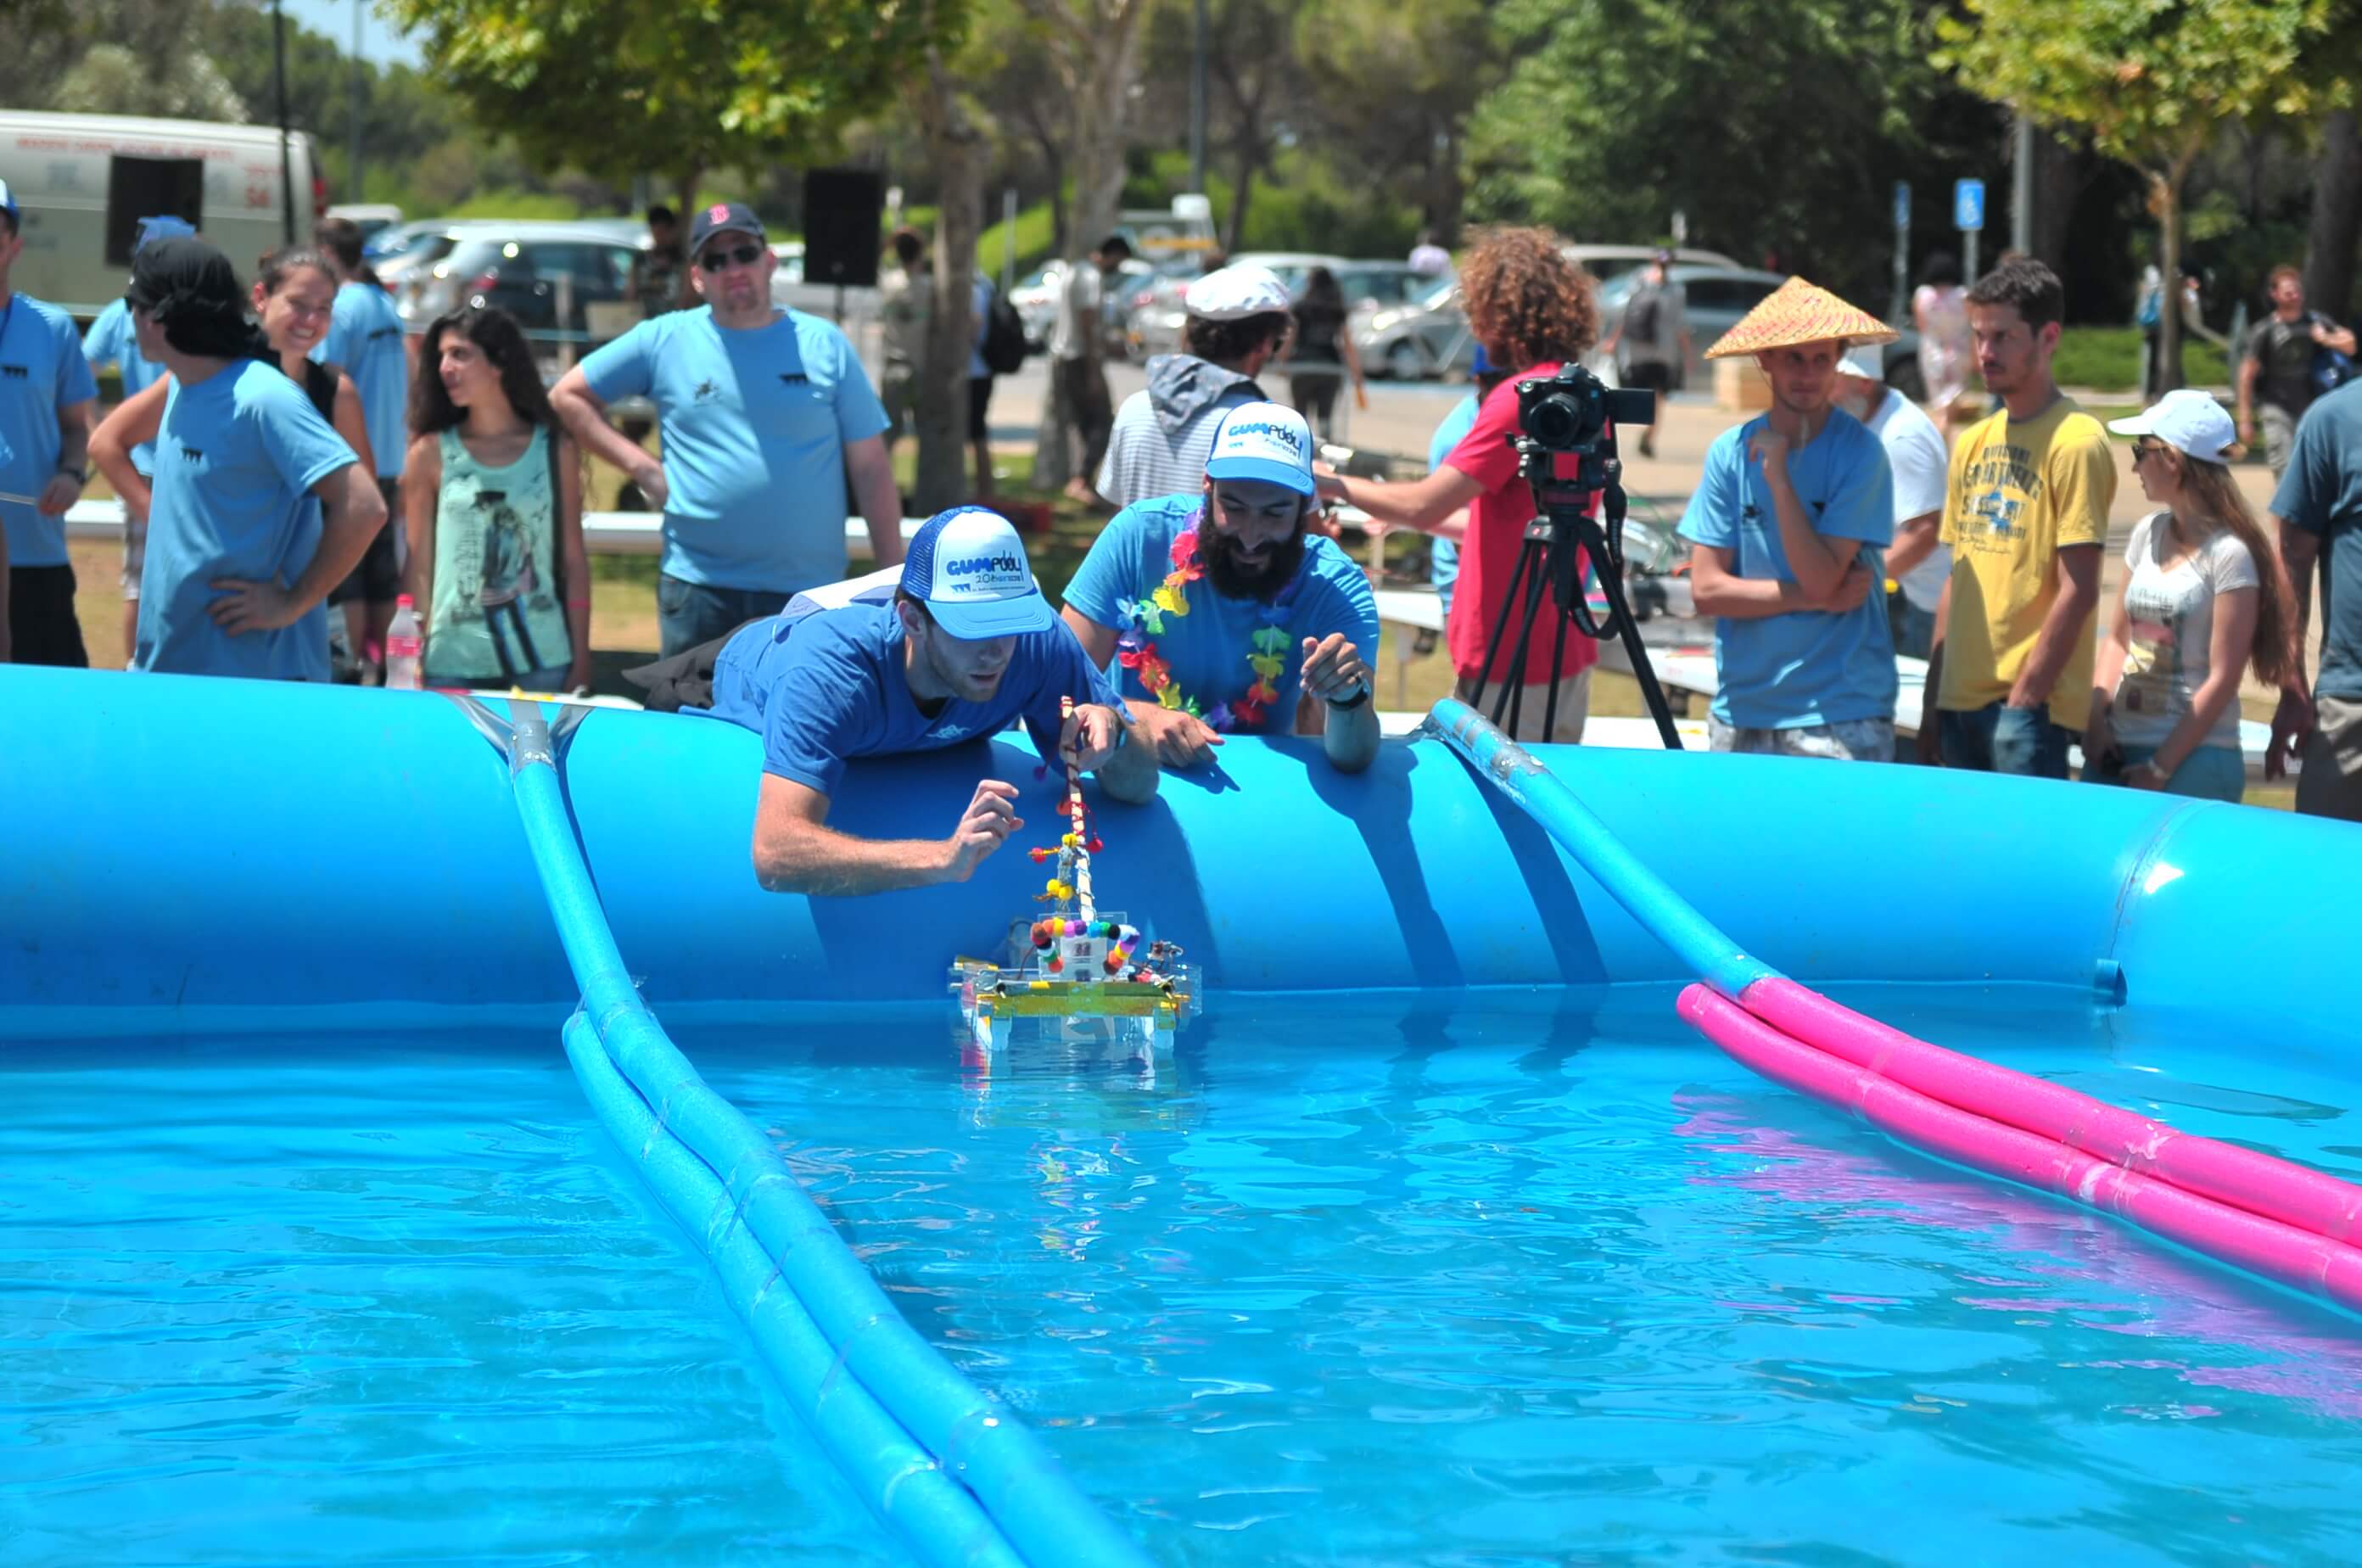 The vessel of Hila Shmuel and Iti Mengel, who won first place. They posted photos. for the Technion barges